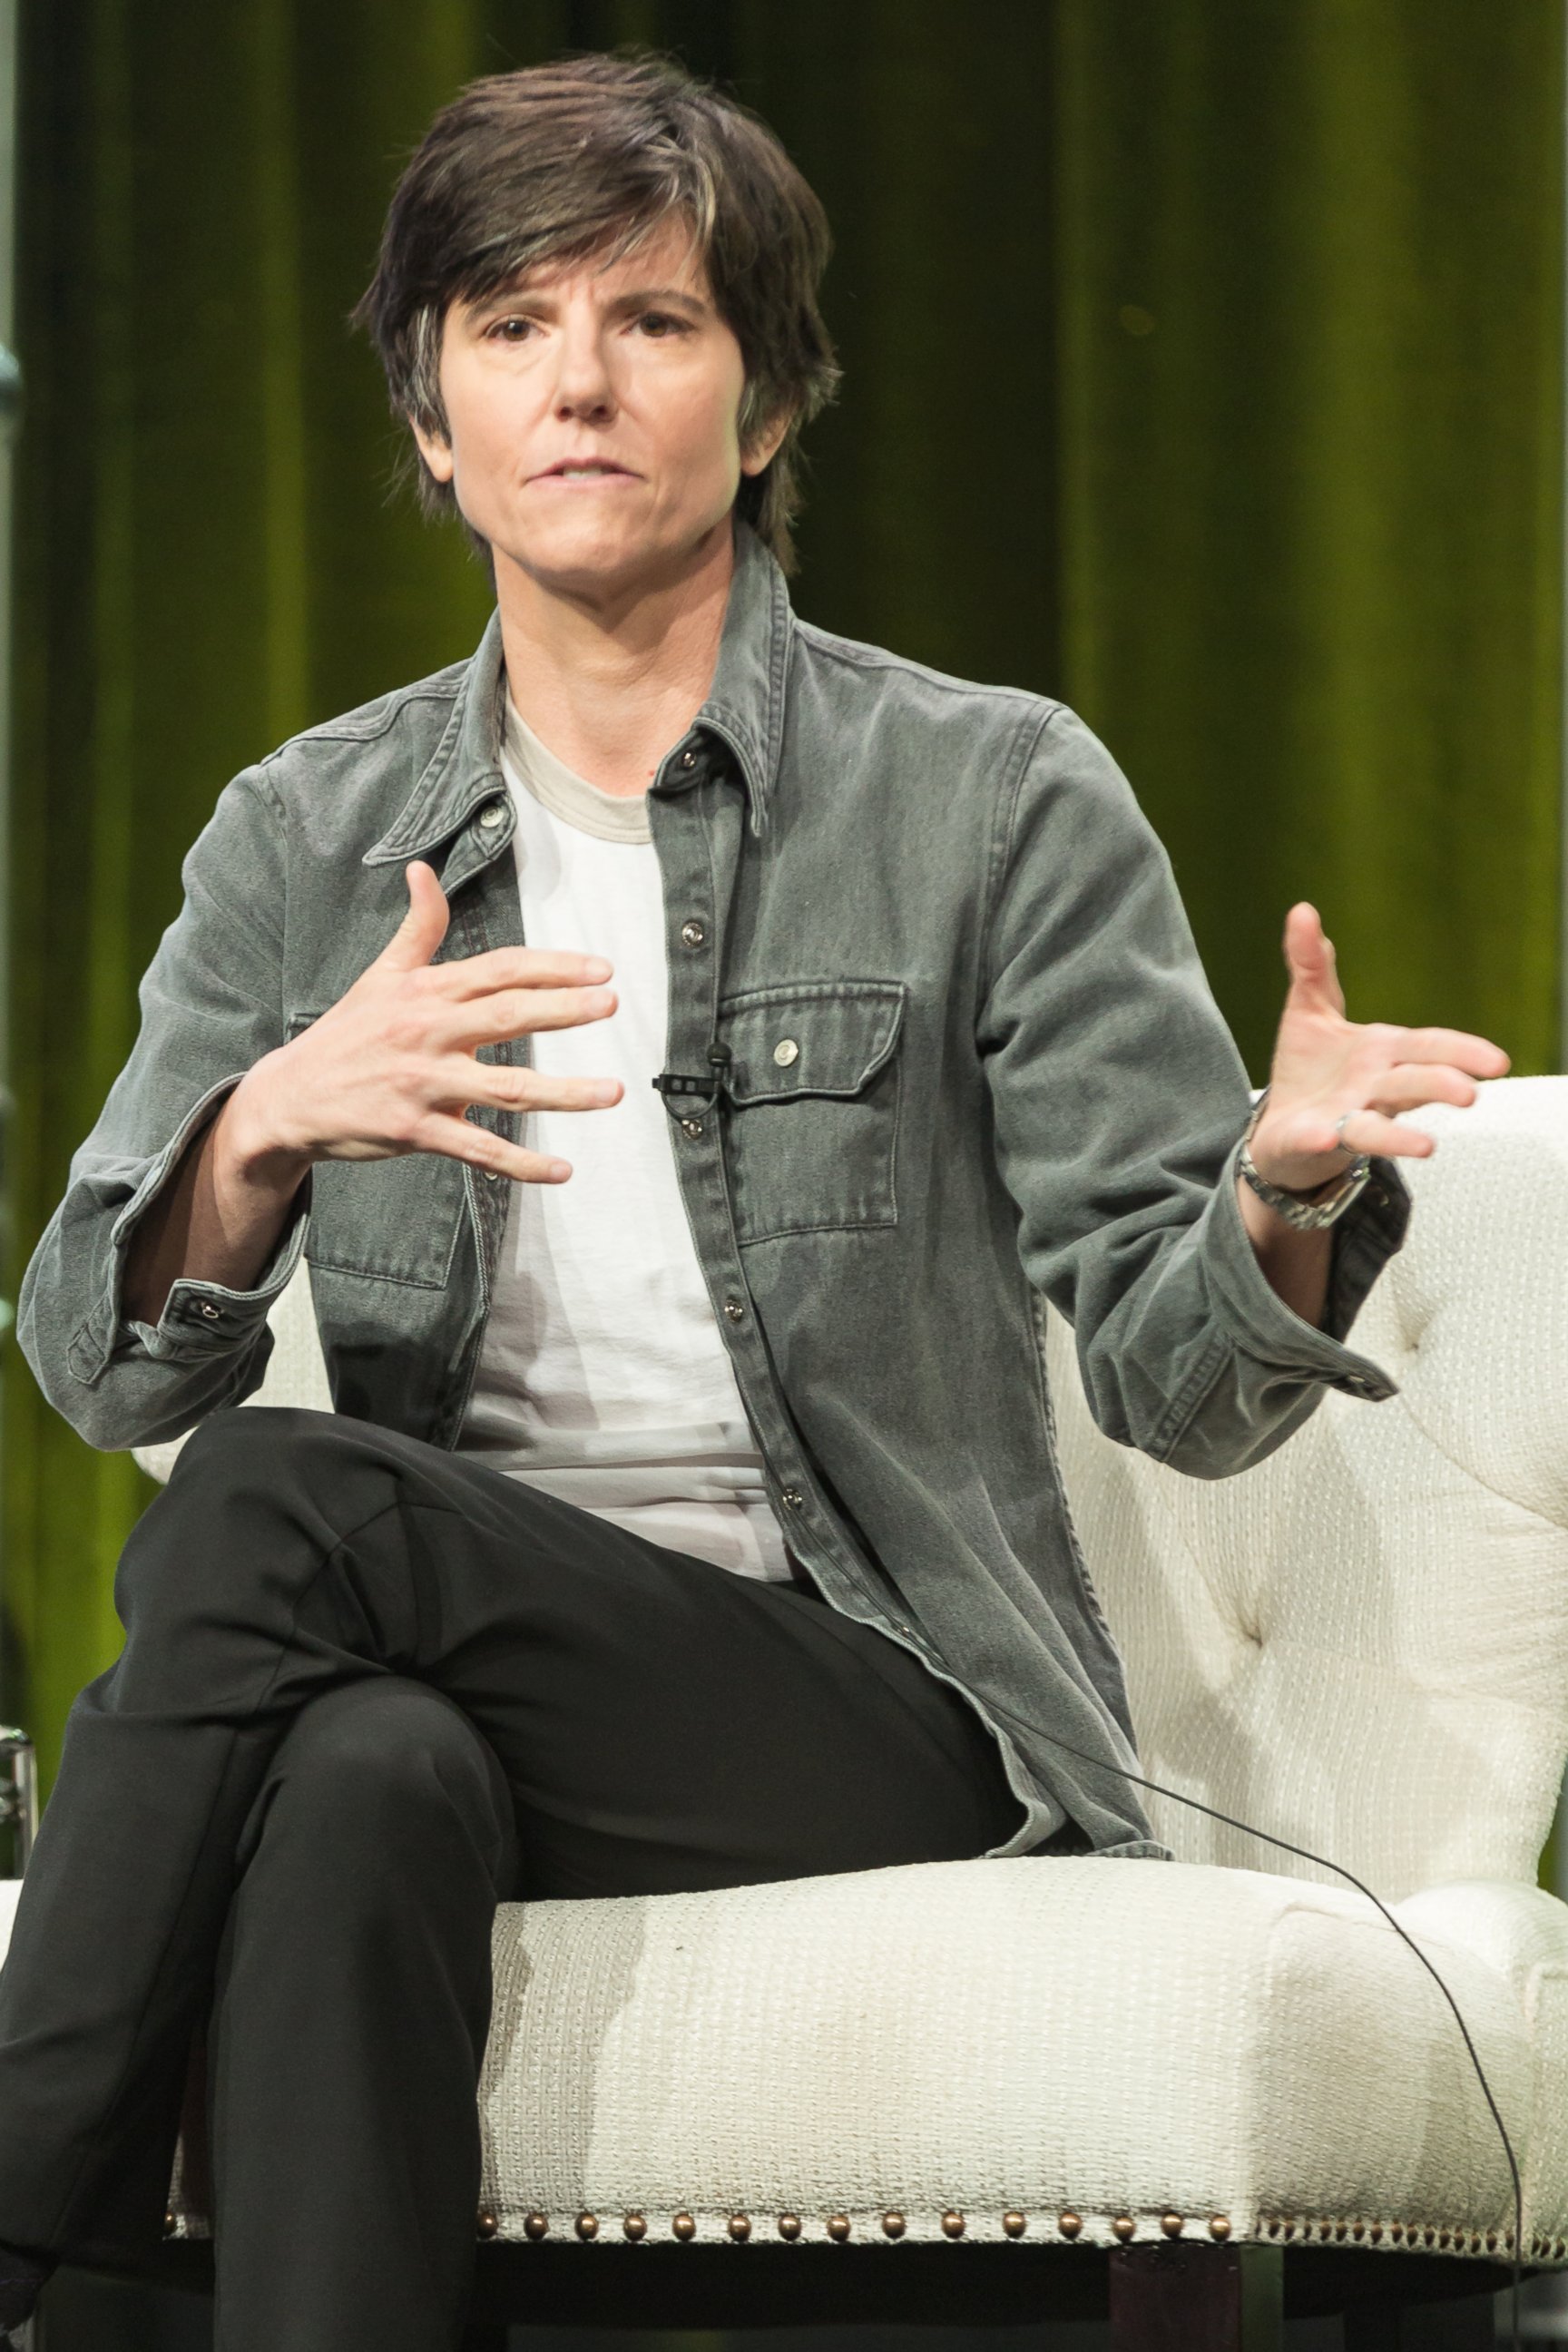 Tig Notaro participates in the "One Mississippi" panel during the Amazon Television Critics Association summer press tour on Sunday, Aug. 7, 2016, in Beverly Hills, Calif.